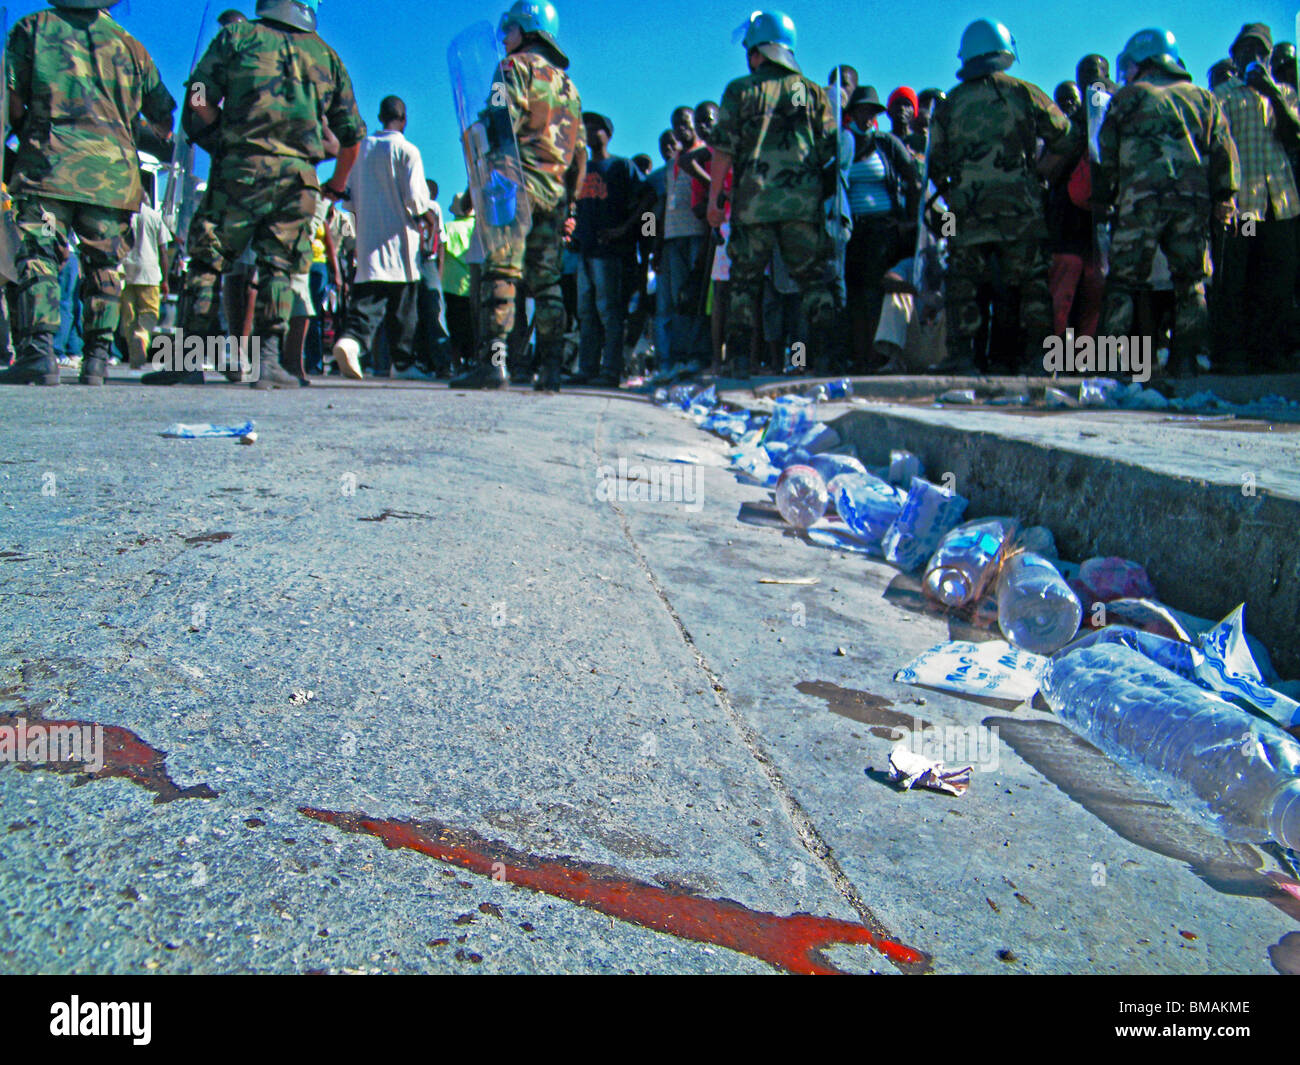 Blood dries on the street outside an aid centre in Port au Prince as UN peacekeepers hold back crowds after the Haiti earthquake Stock Photo